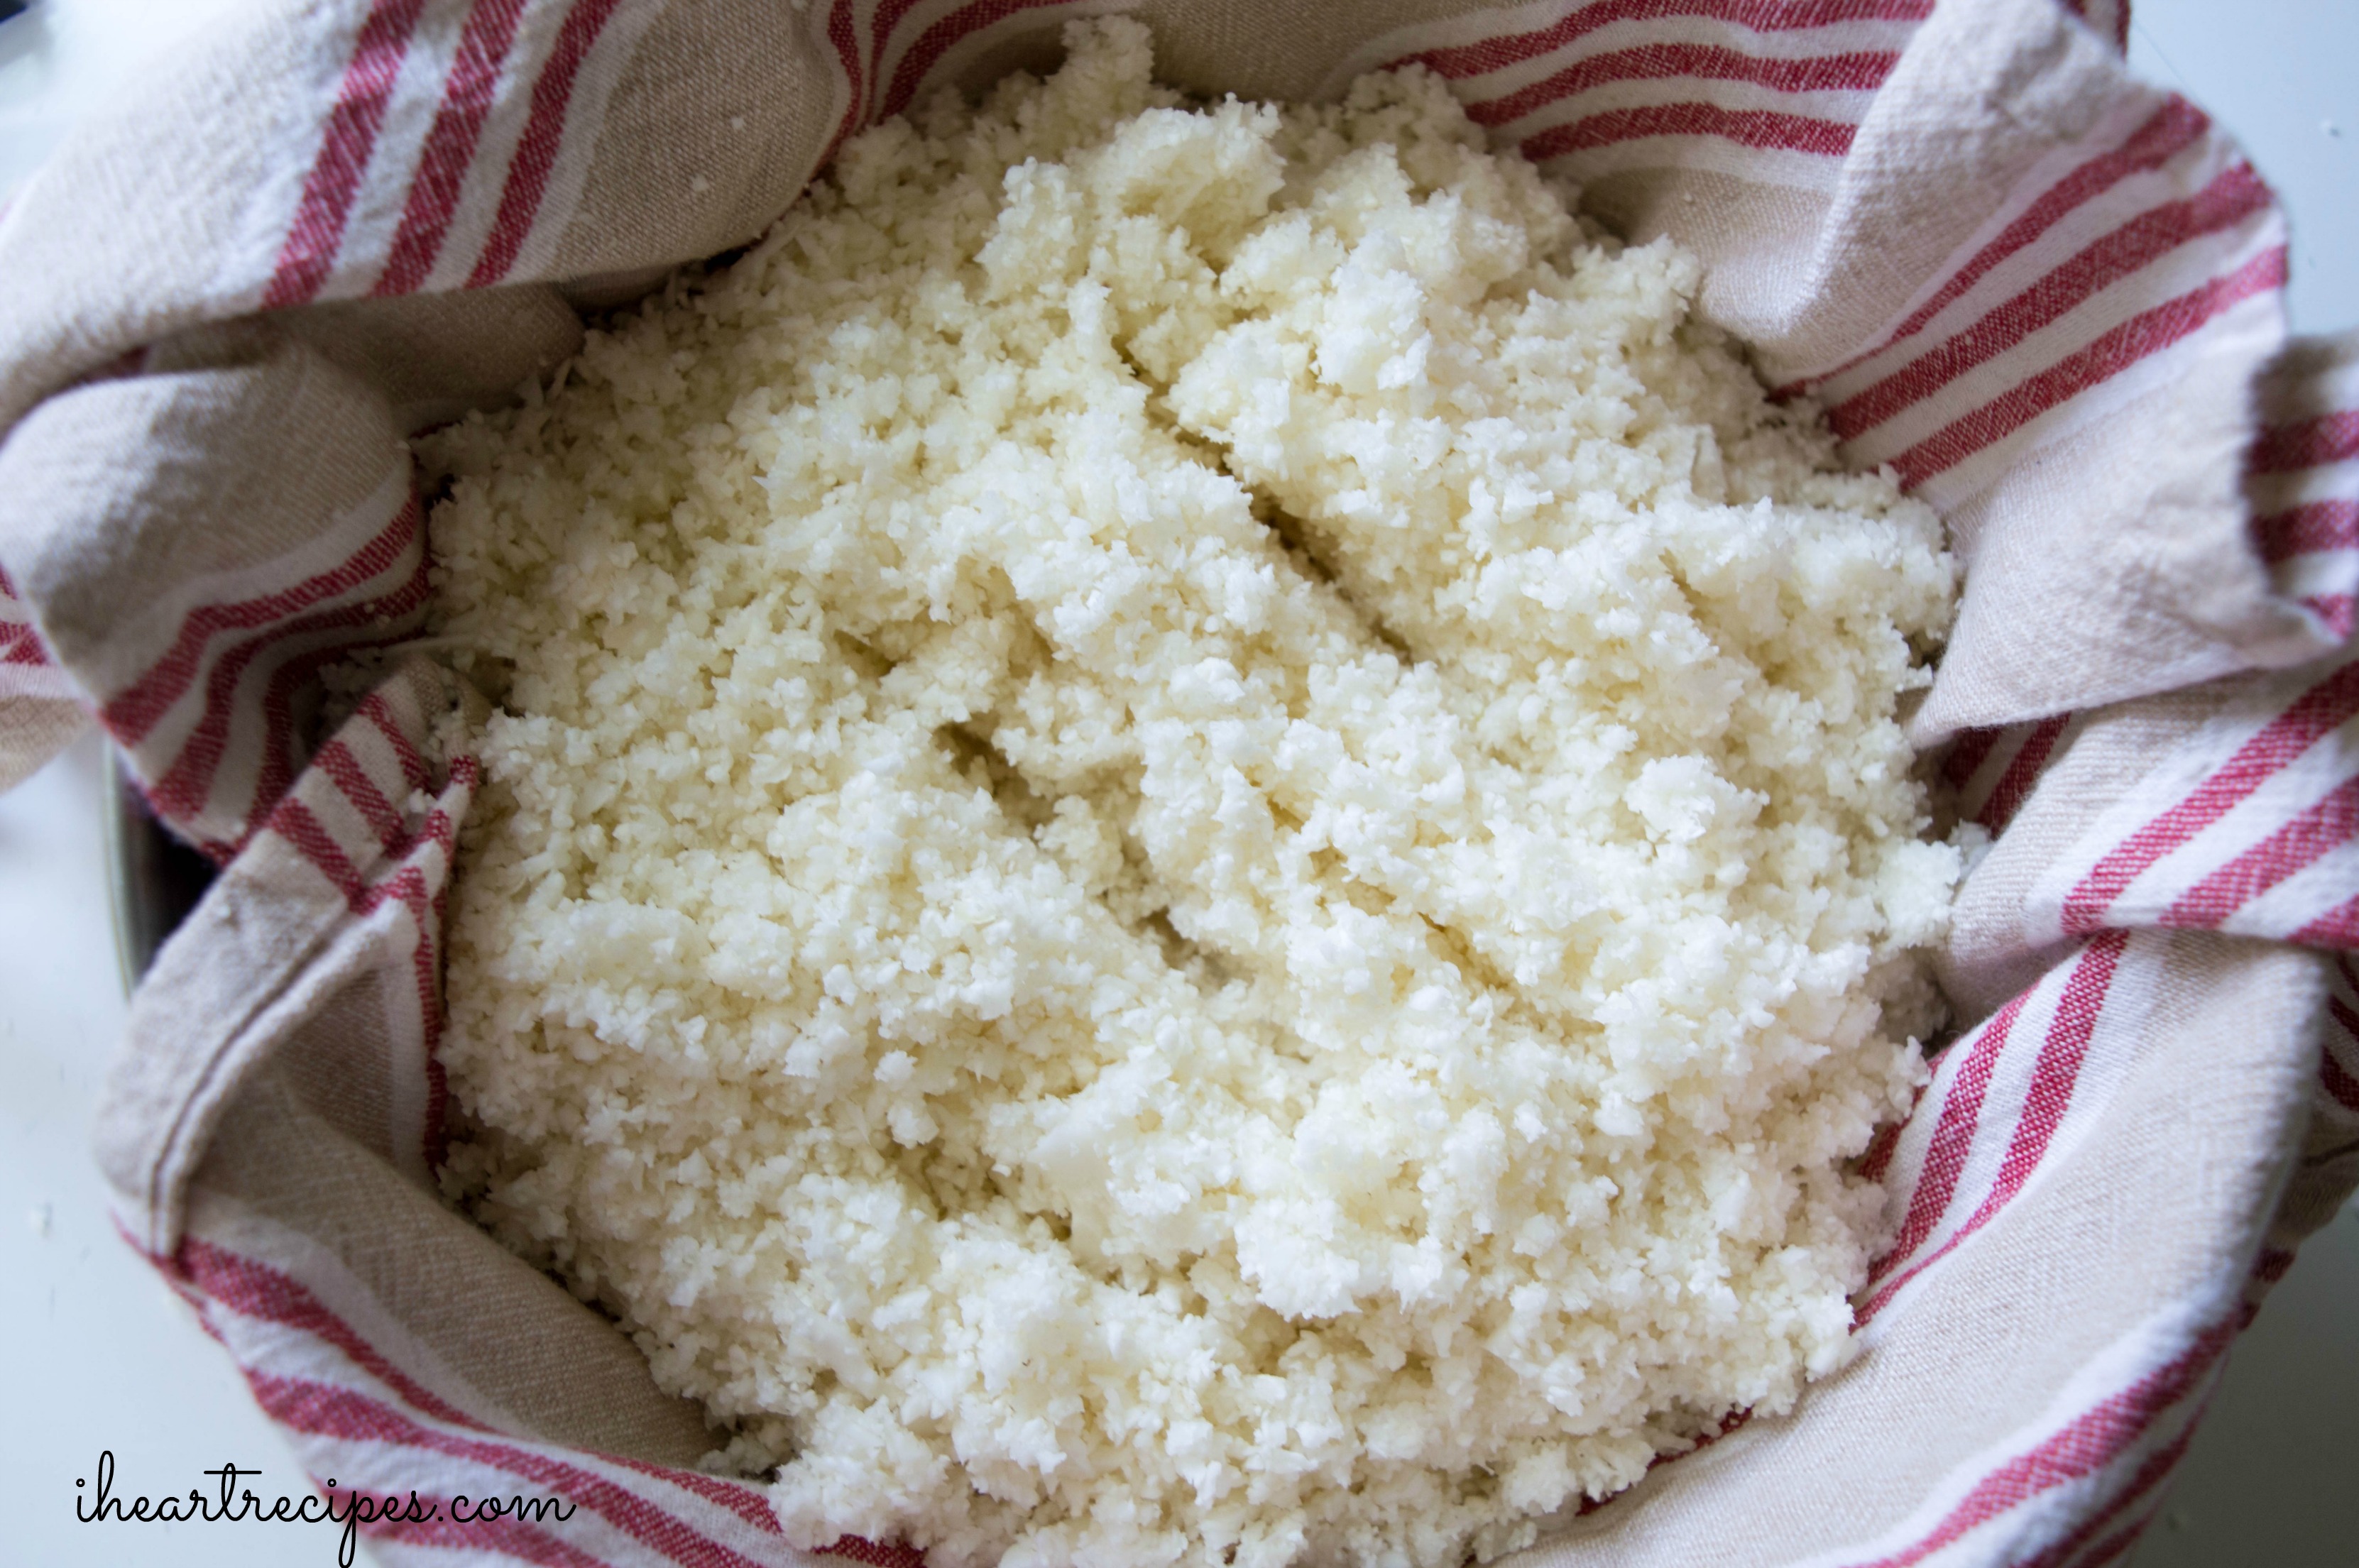 Pour the riced cauliflower into a bowl lined with a tea towel.